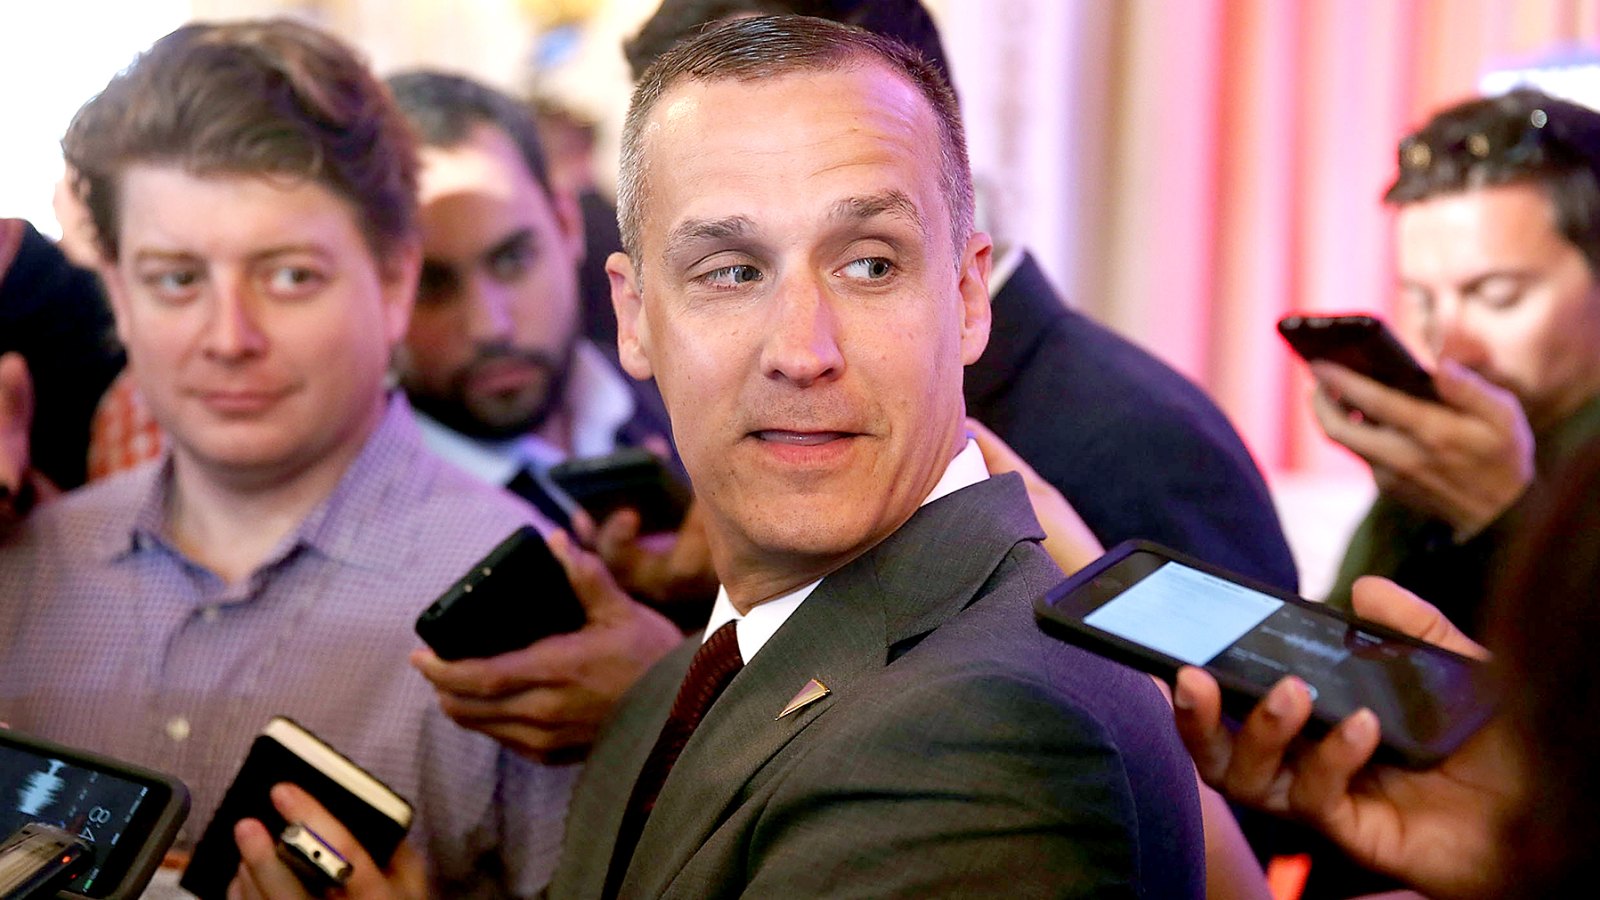 Corey Lewandowski campaign manager for Republican presidential candidate Donald Trump speaks with the media before former presidential candidate Ben Carson gives his endorsement to Mr. Trump at the Mar-A-Lago Club on March 11, 2016.